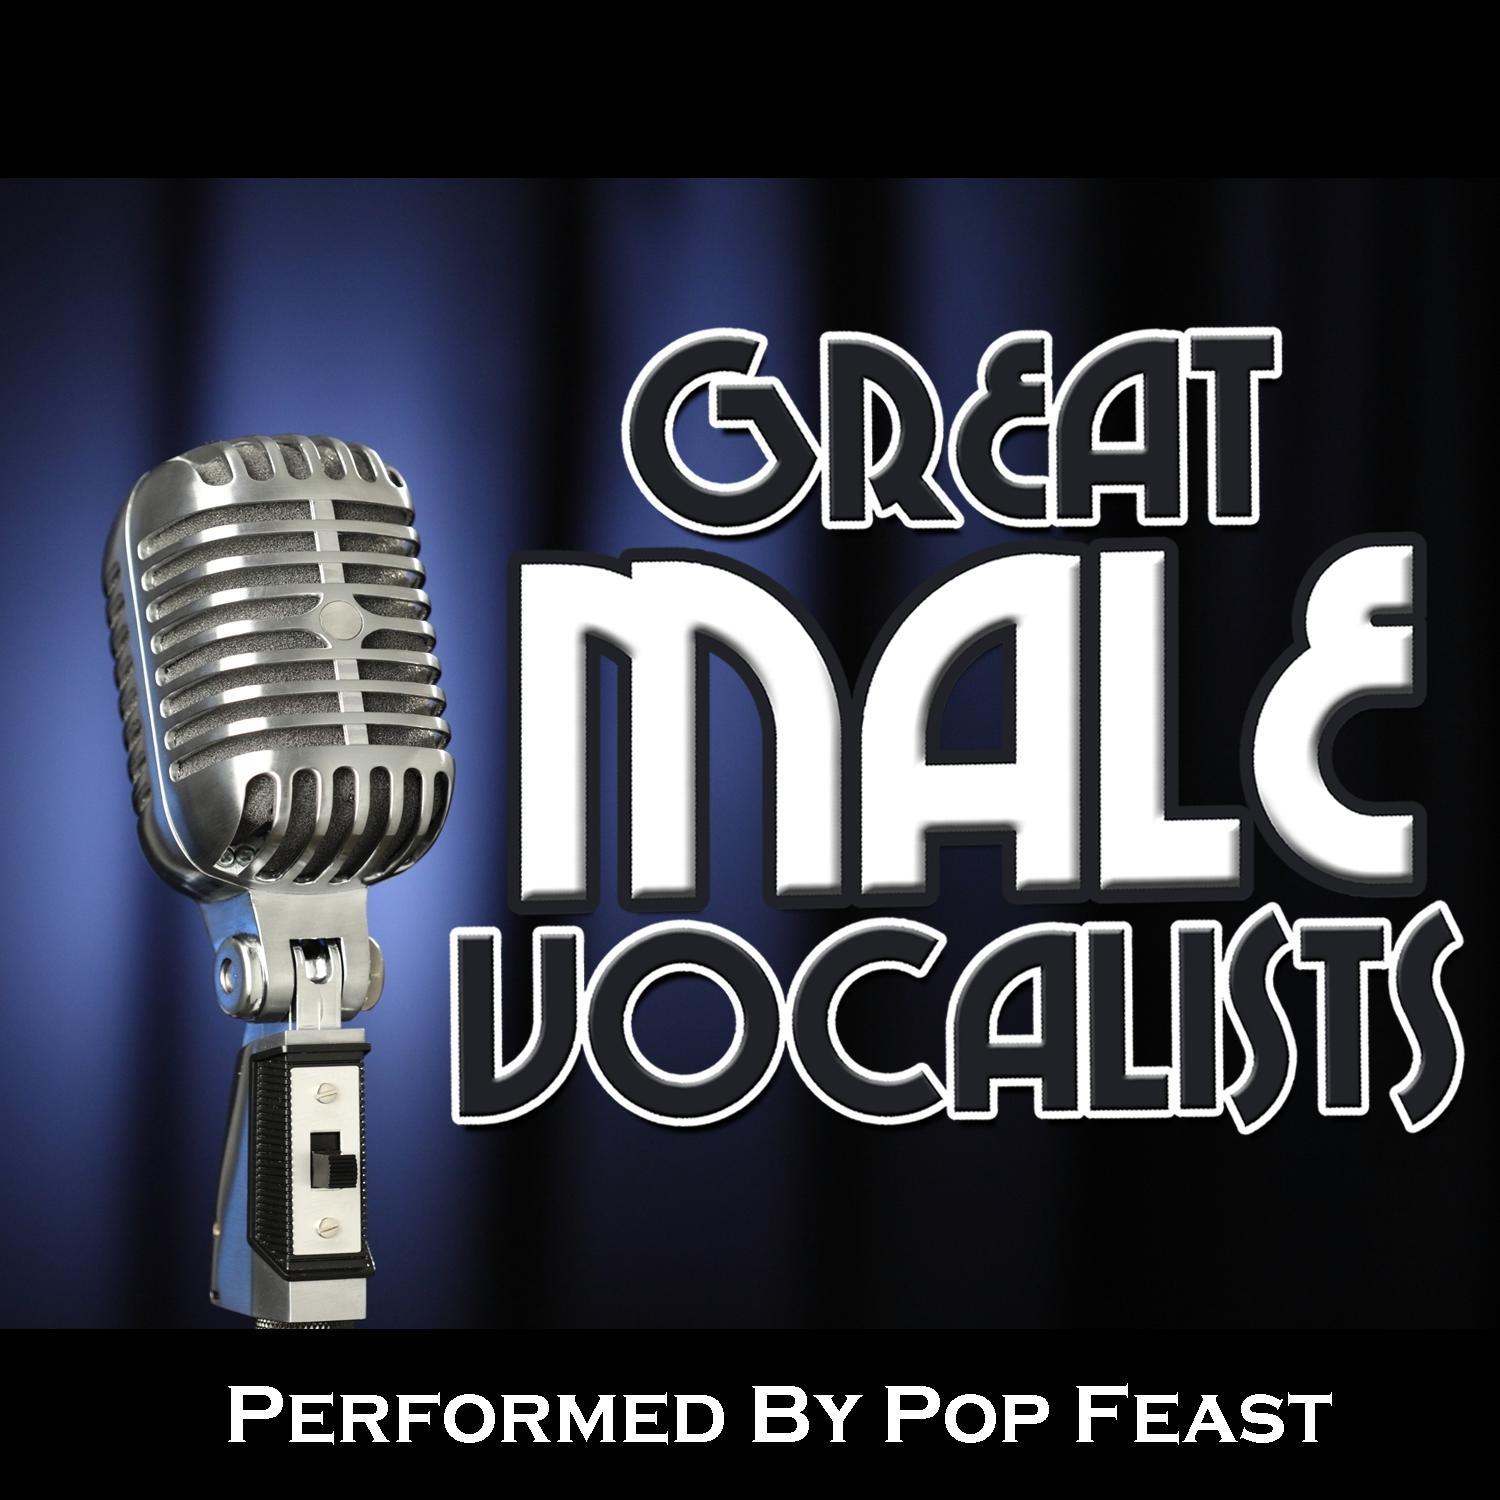 Great Male Vocalists